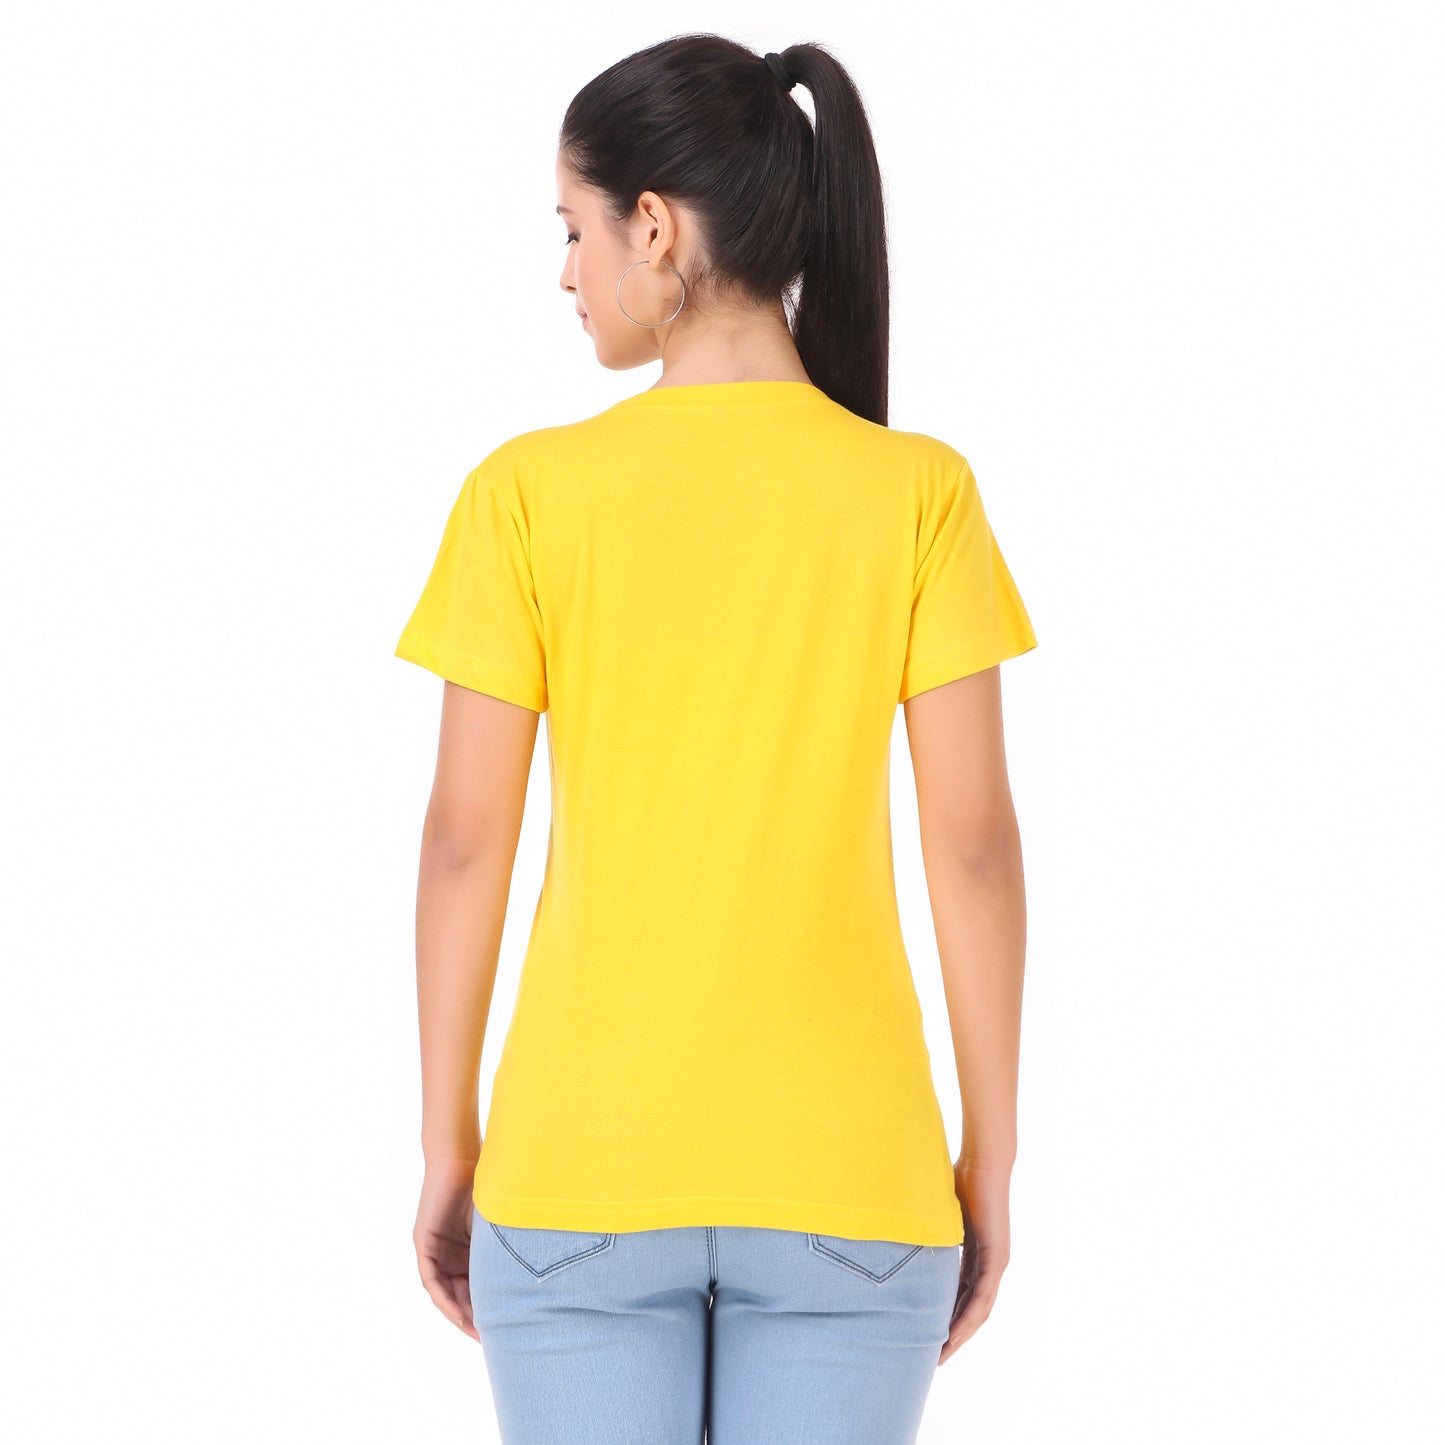 Yellow Tree & White Mickey Mouse Print Combo ( 2 Tops) Trendy T Shirt!!